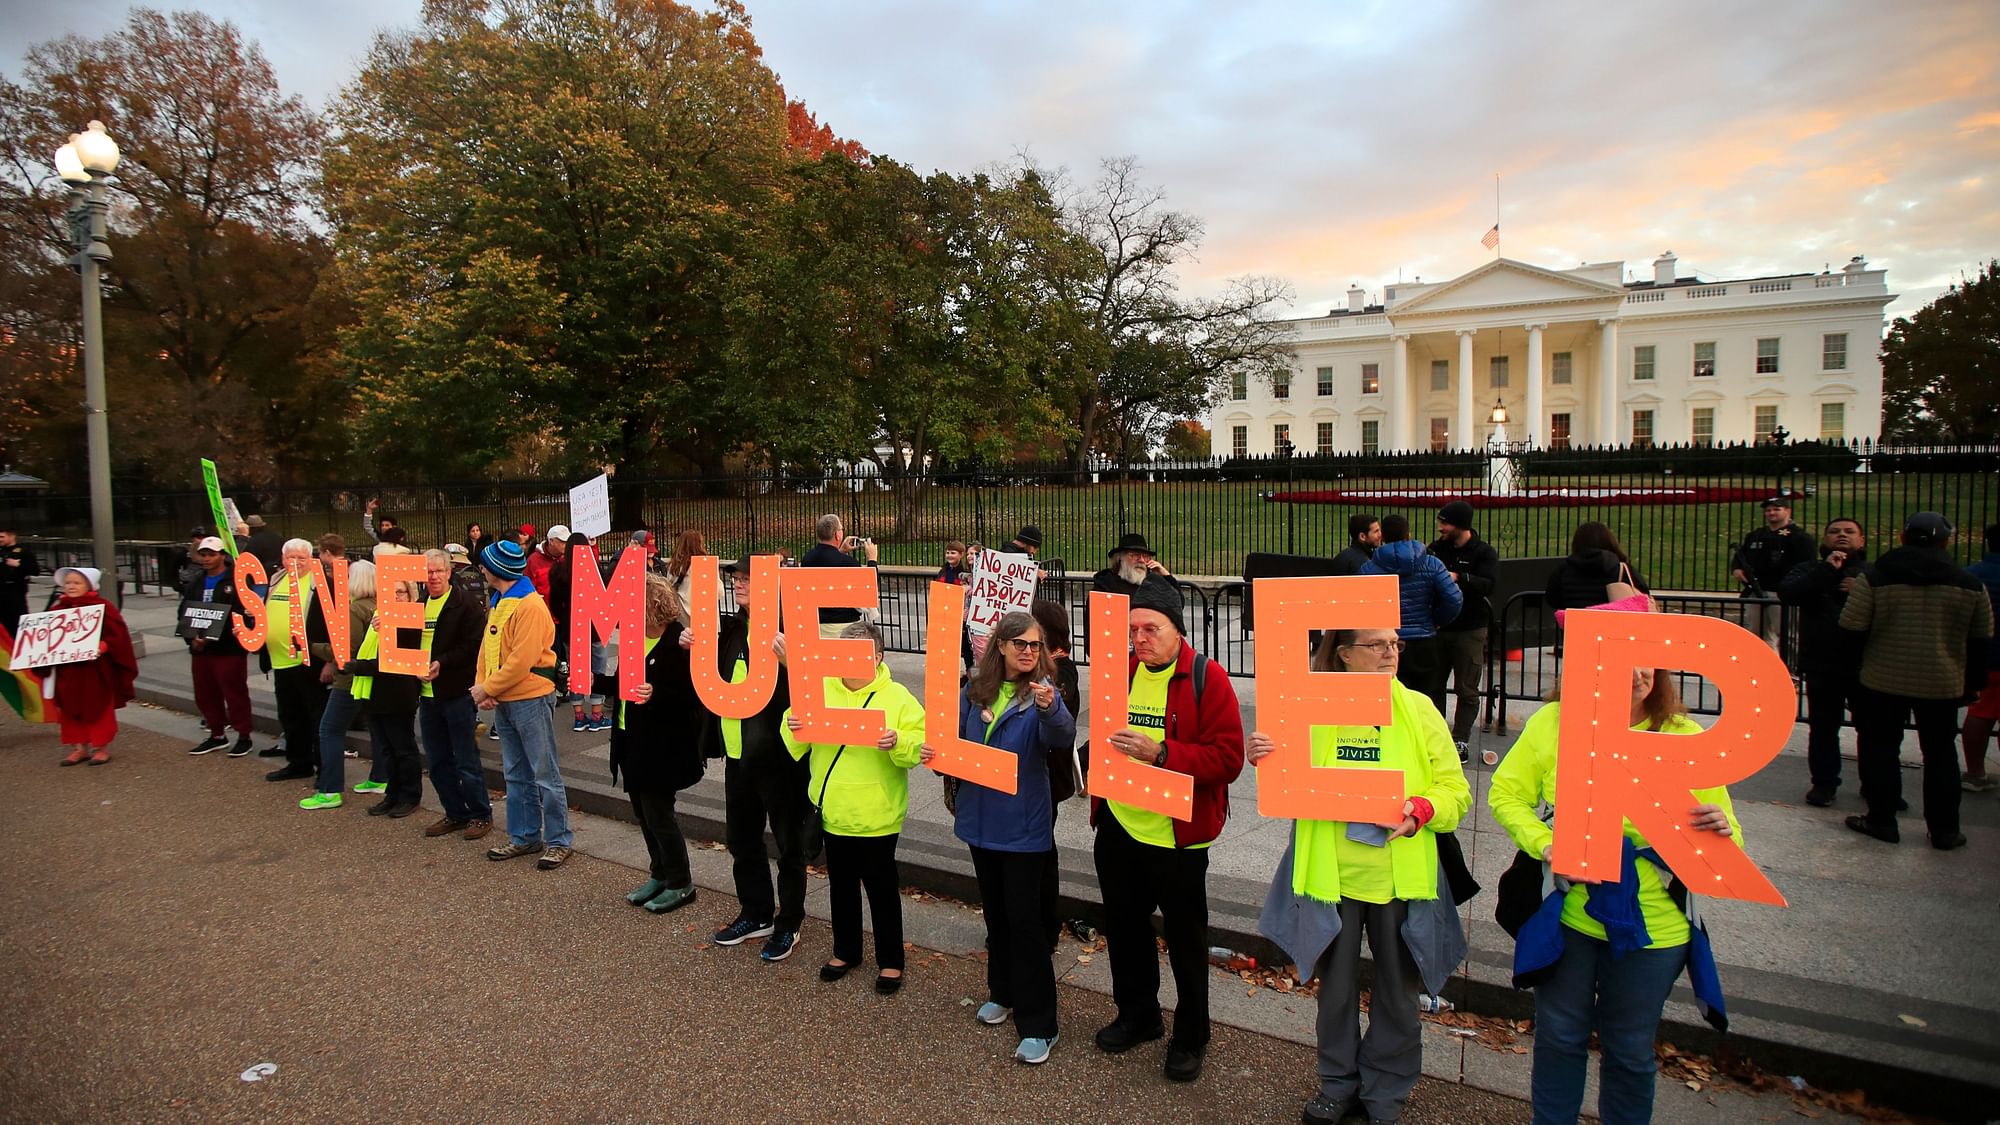 Protestors gather in front of the White House in Washington, Thursday, 8 November 2018, as part of a nationwide “Protect Mueller” campaign.